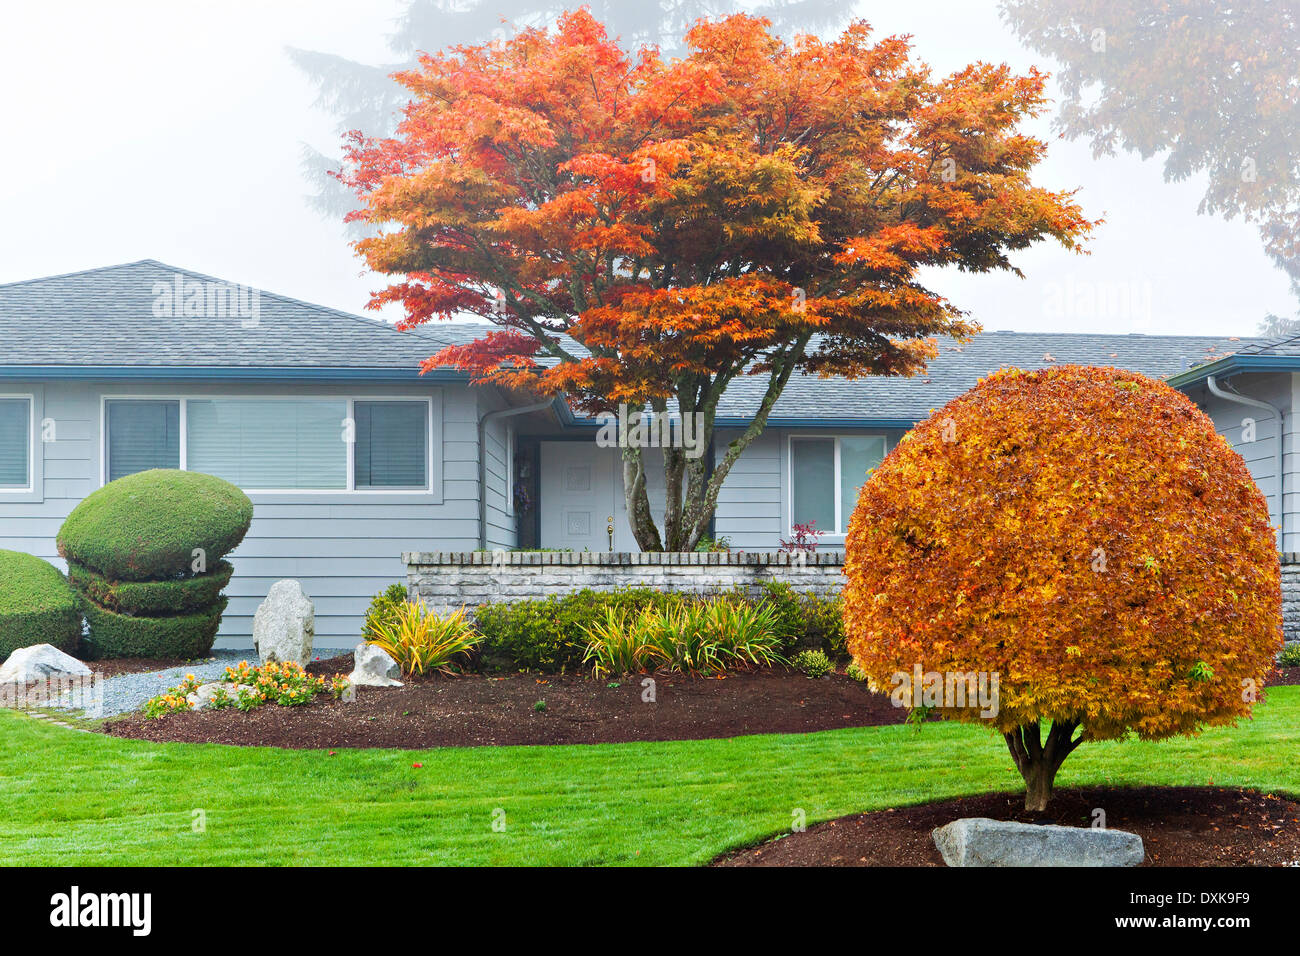 Autumn leaves on trees in front of house Stock Photo